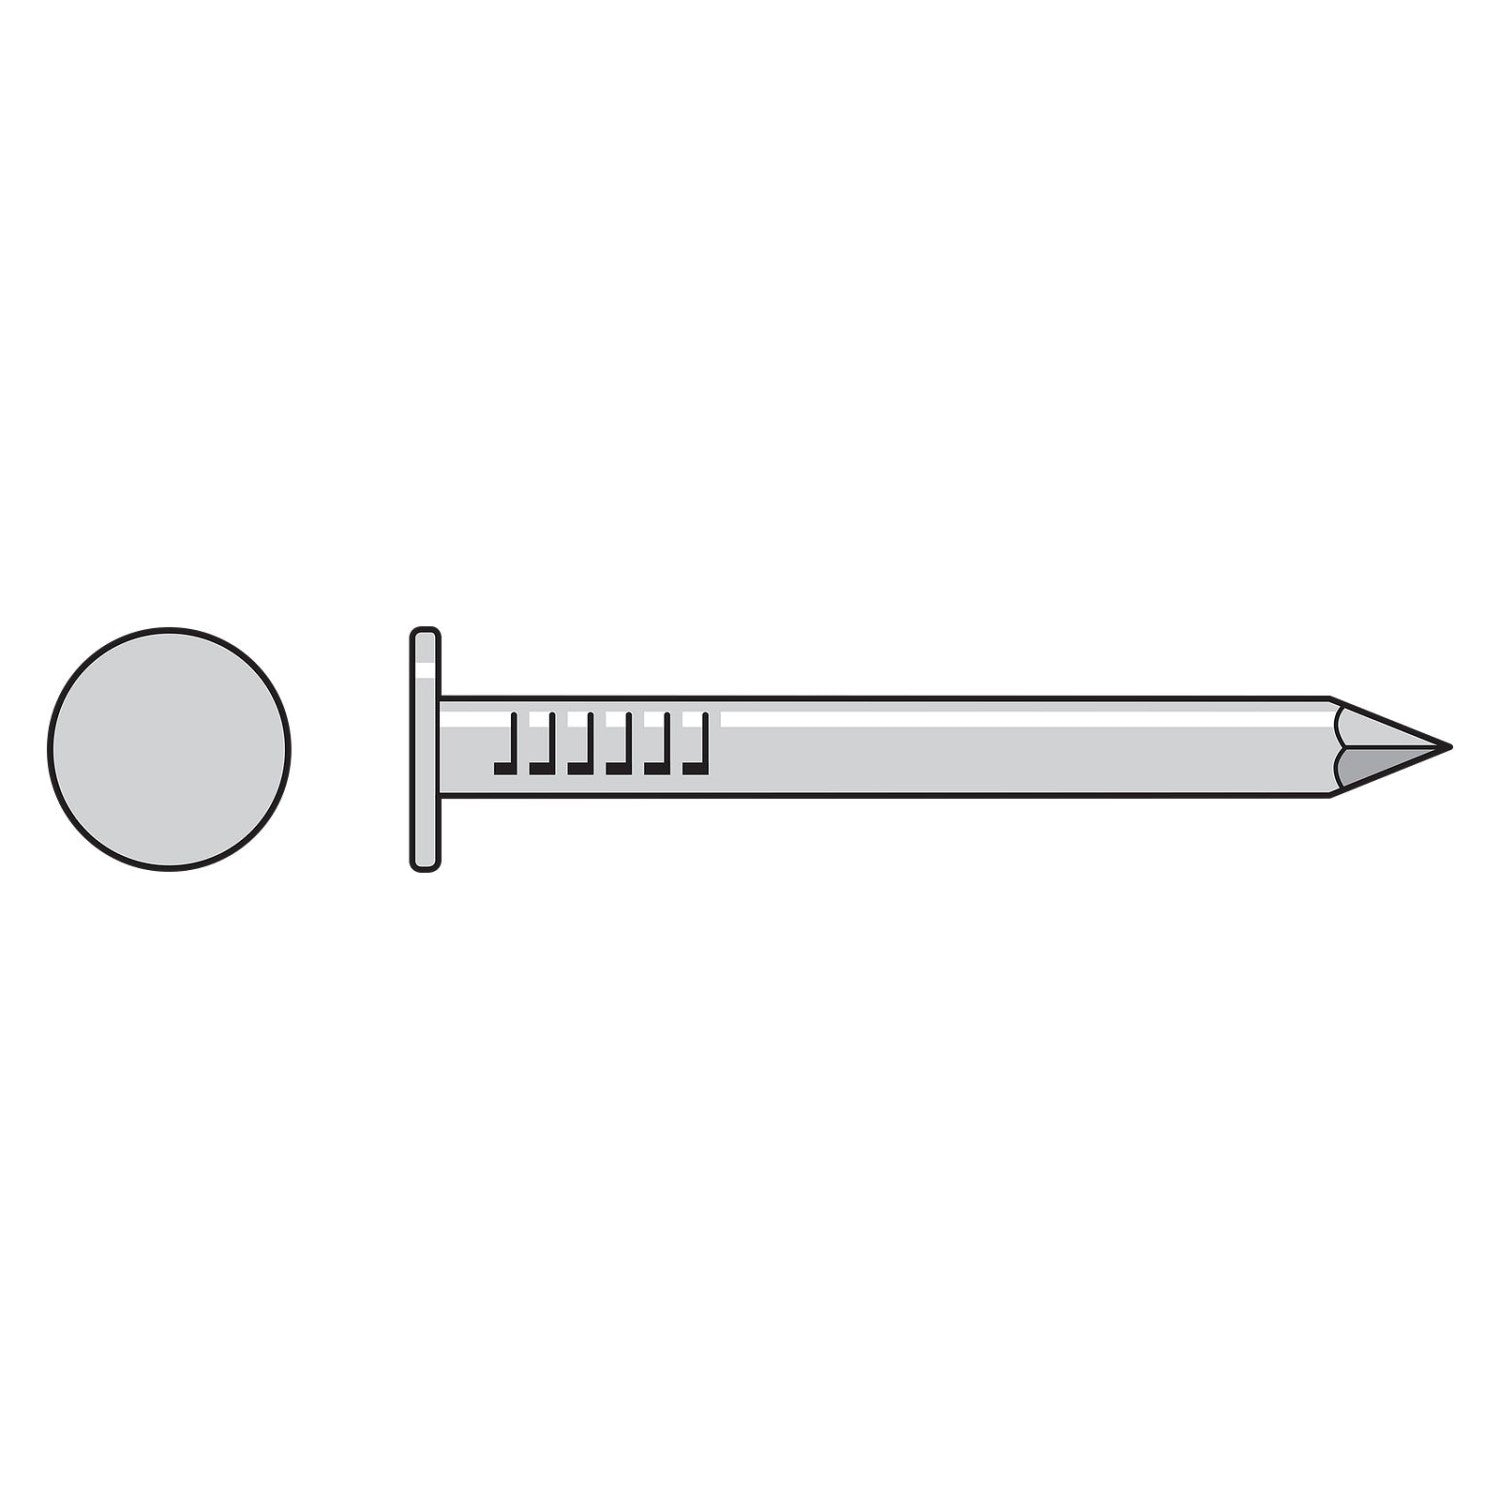 Roofing Nail Smooth Shank Illustration